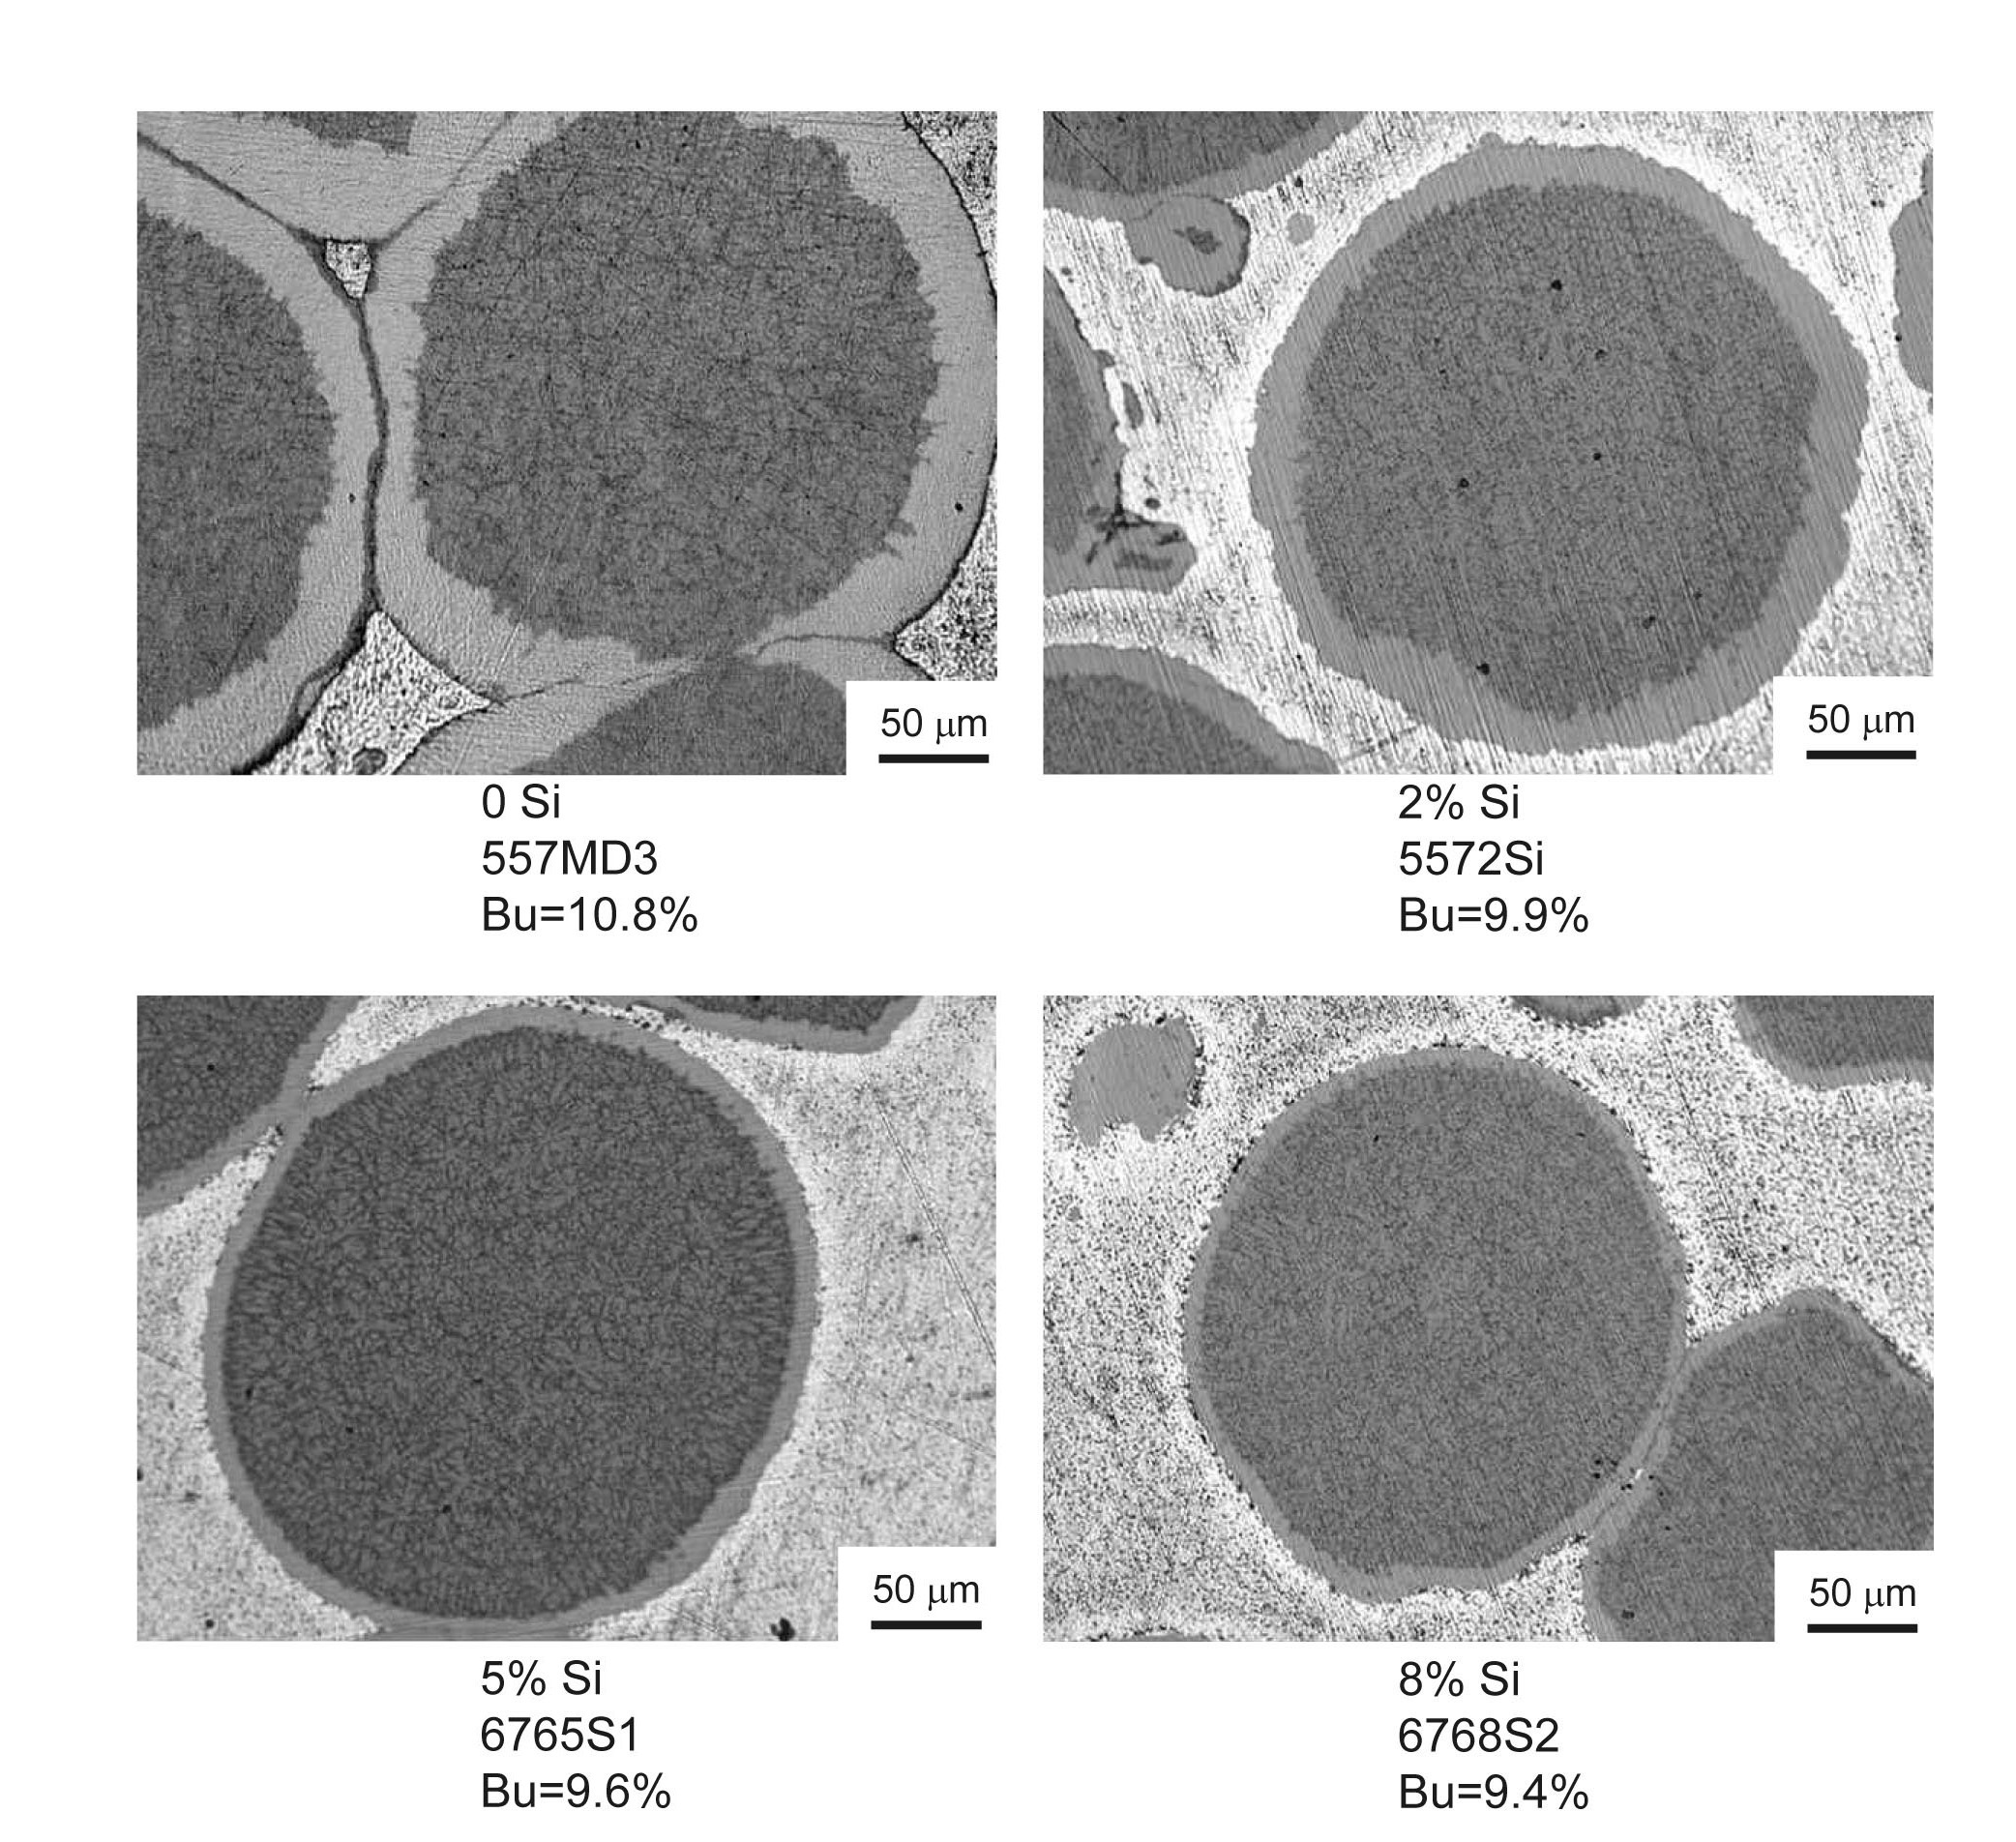 Post Irradiation Micrographs Showing Microstructures
of KOMO-4 Samples. The Burnup is in Percent Fission Per
Initial Heavy Metal Atom (FIHMA).